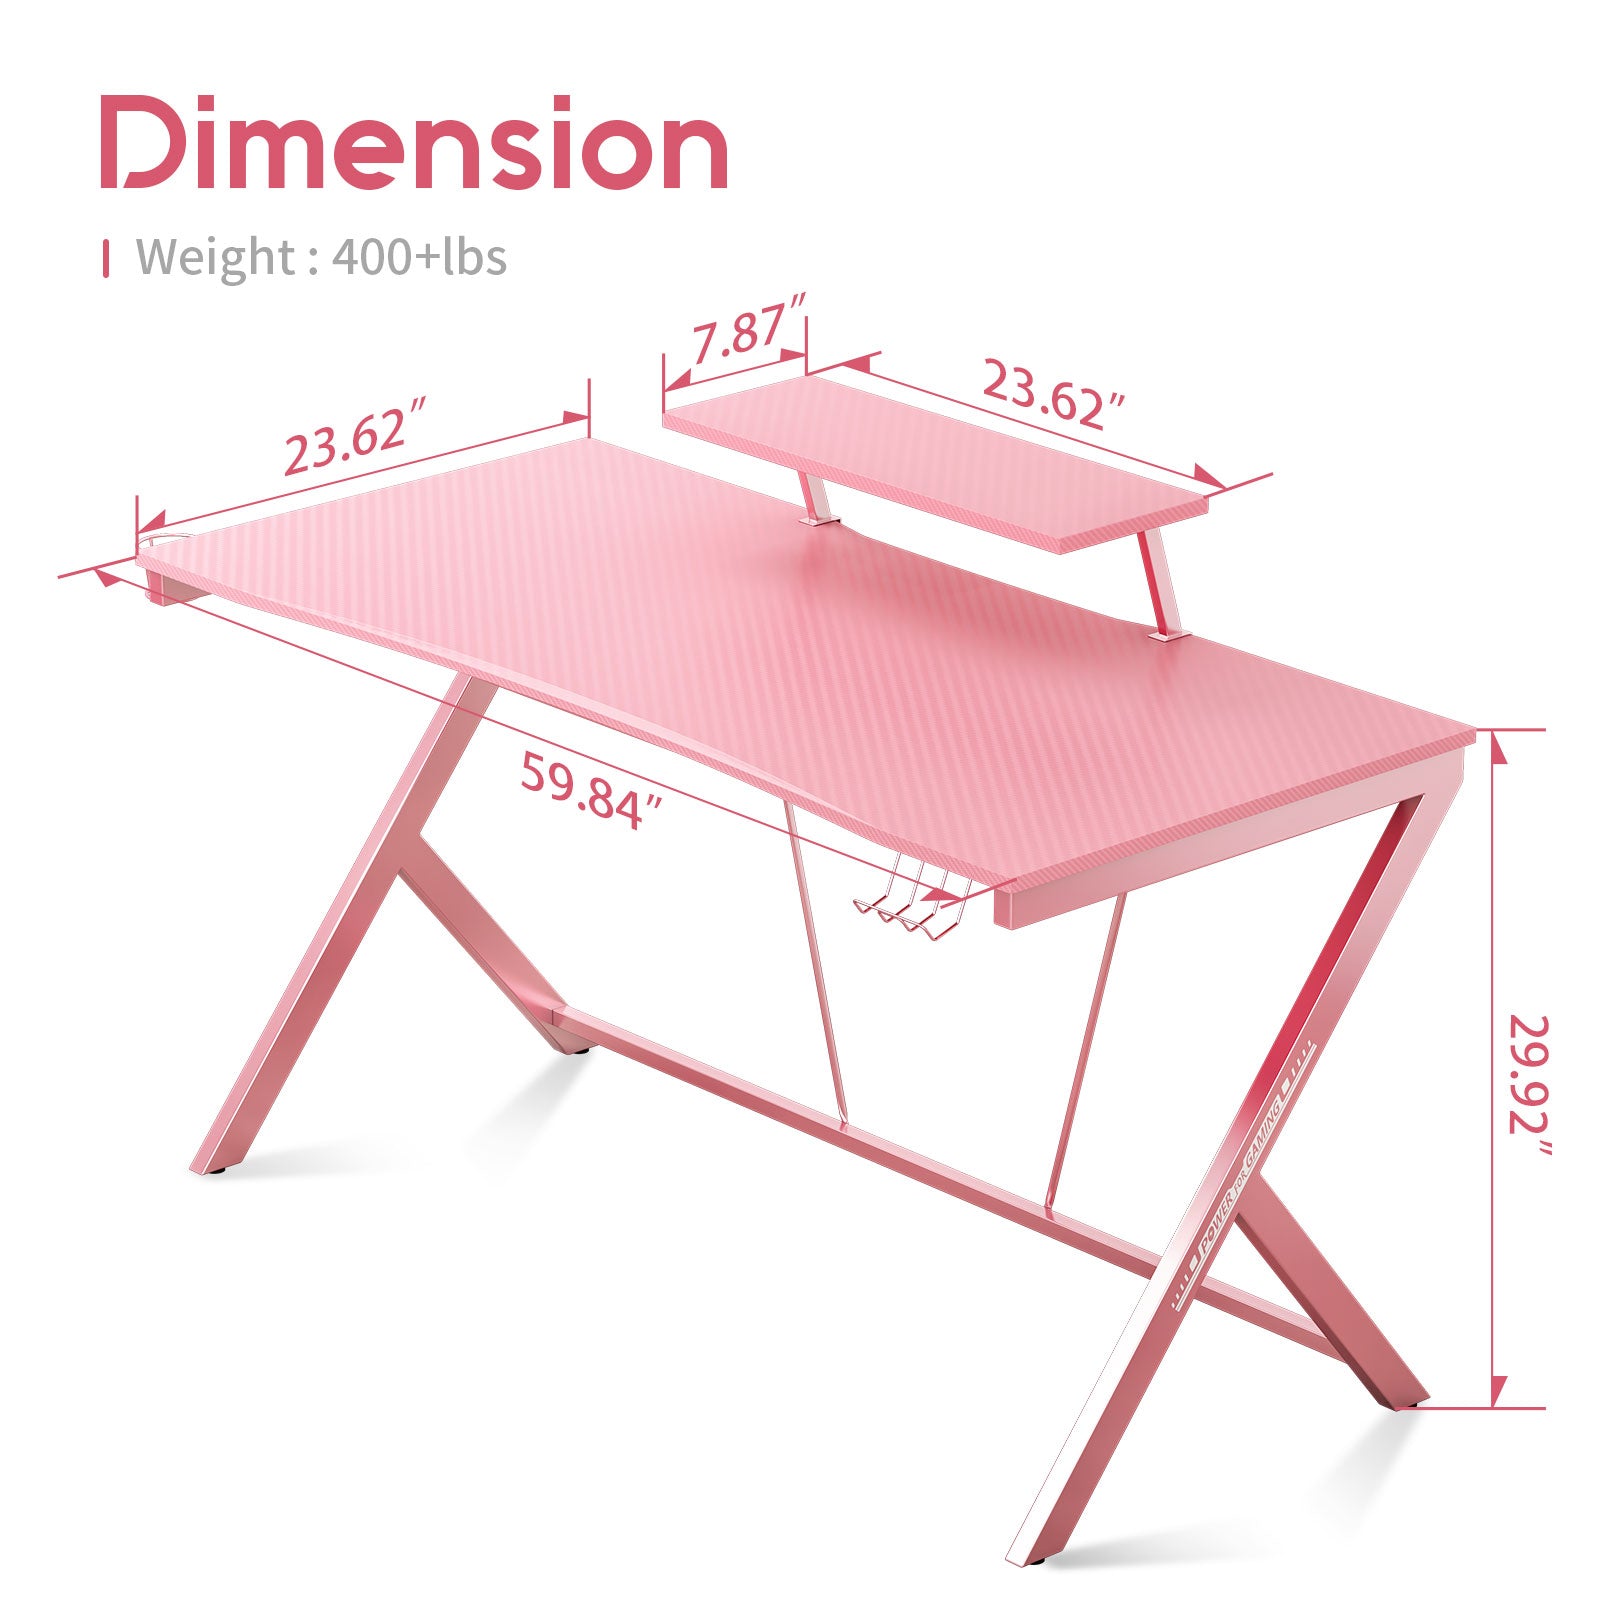 60" Gaming Desk With Monitor Shelf-Pink